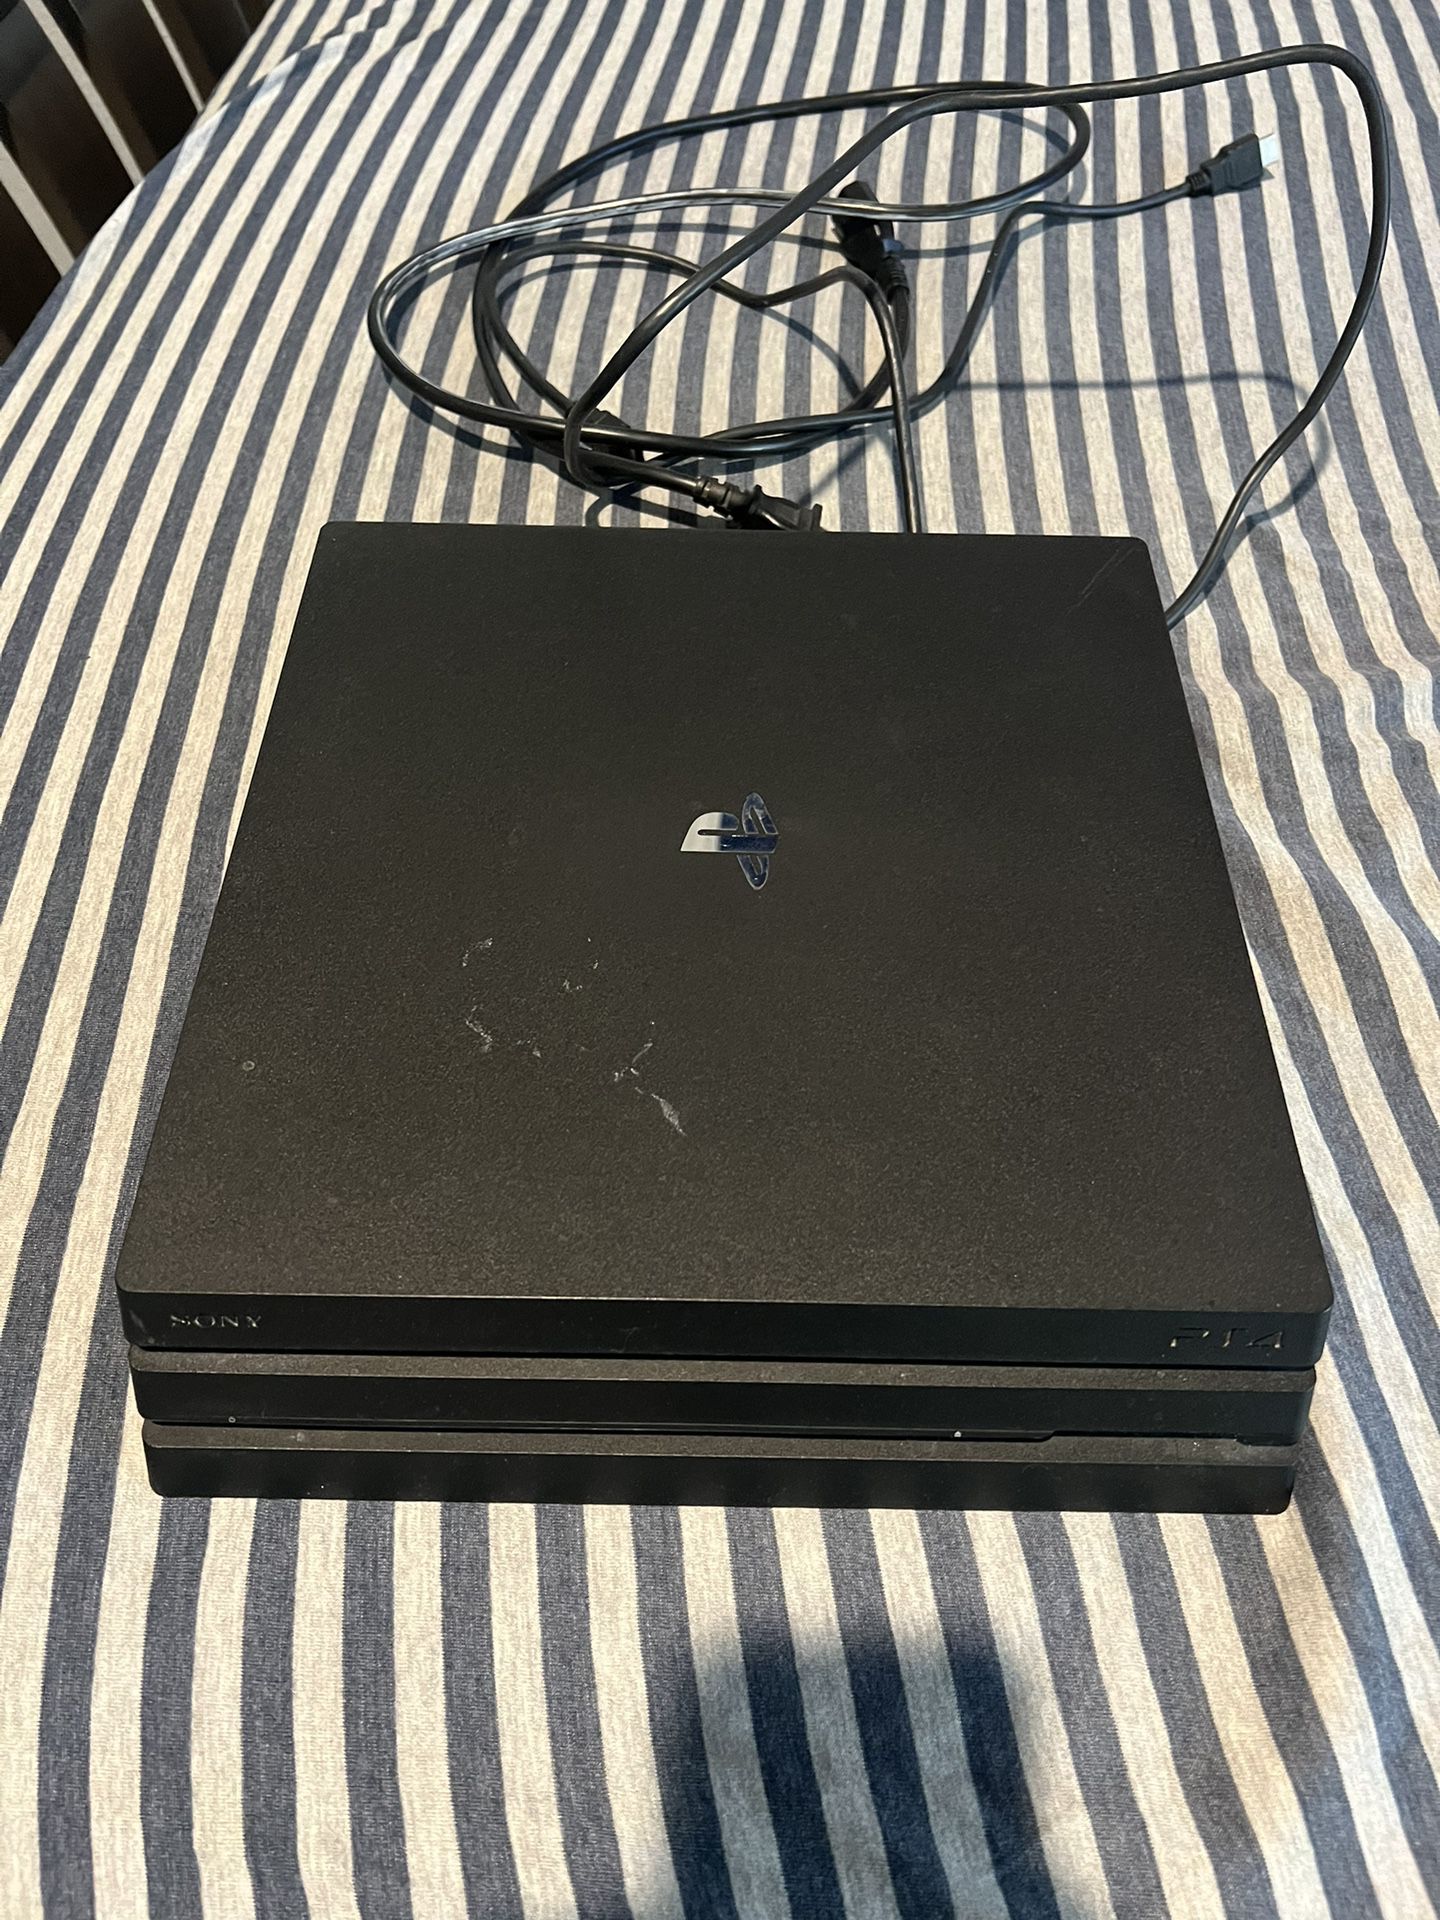 PS4 pro With Gaming Headphones HDMI , Power, And Charging Cable